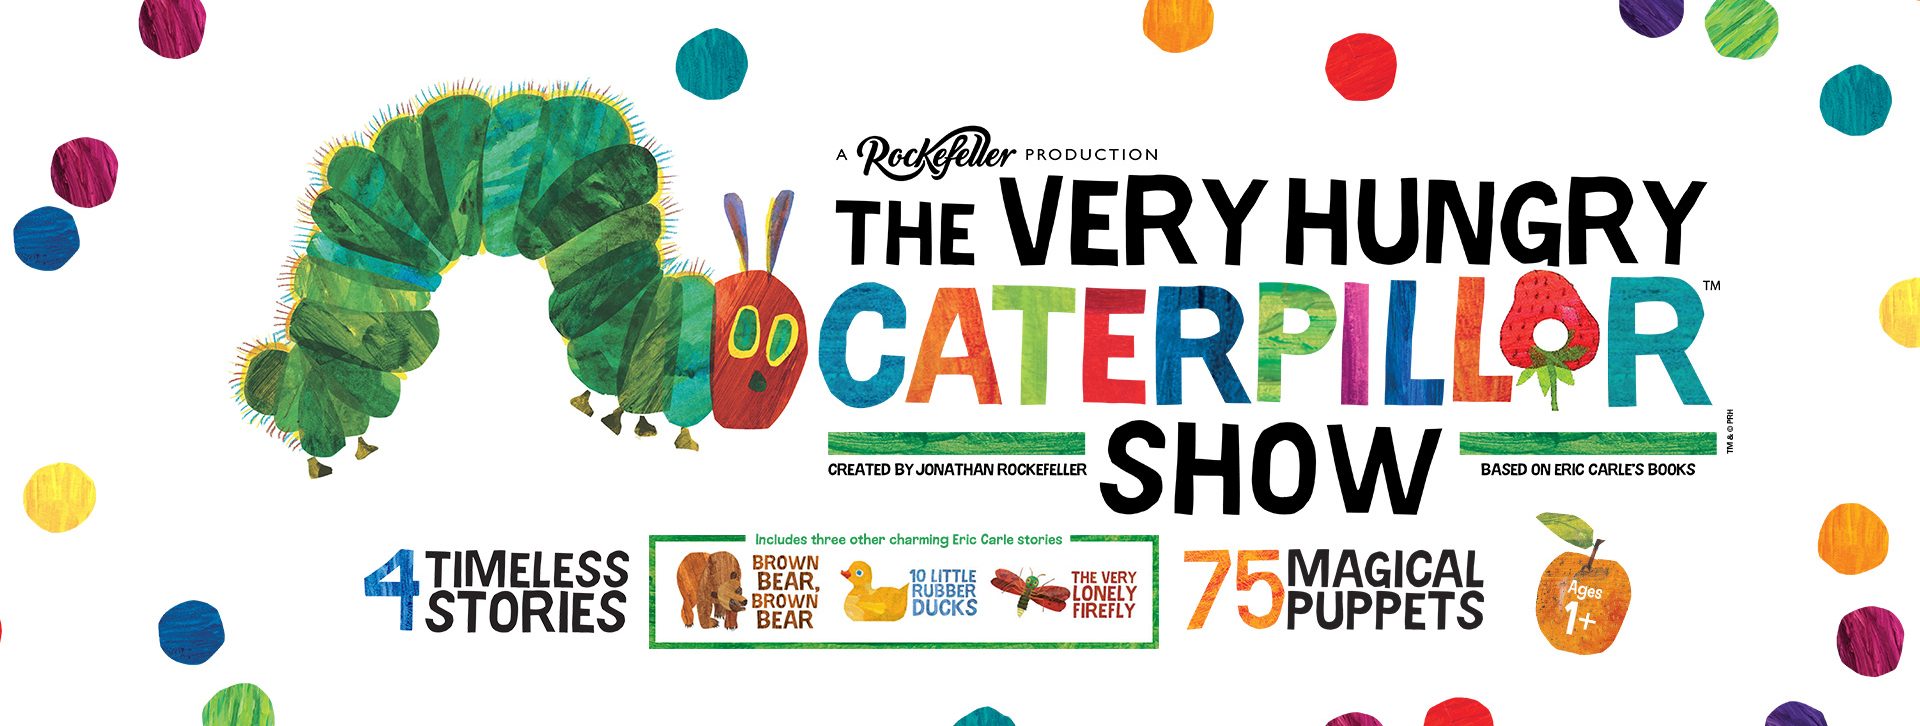 The Very Hungry Caterpillar Show - The Landmark Ilfracombe and Queen's Theatre Barnstaple